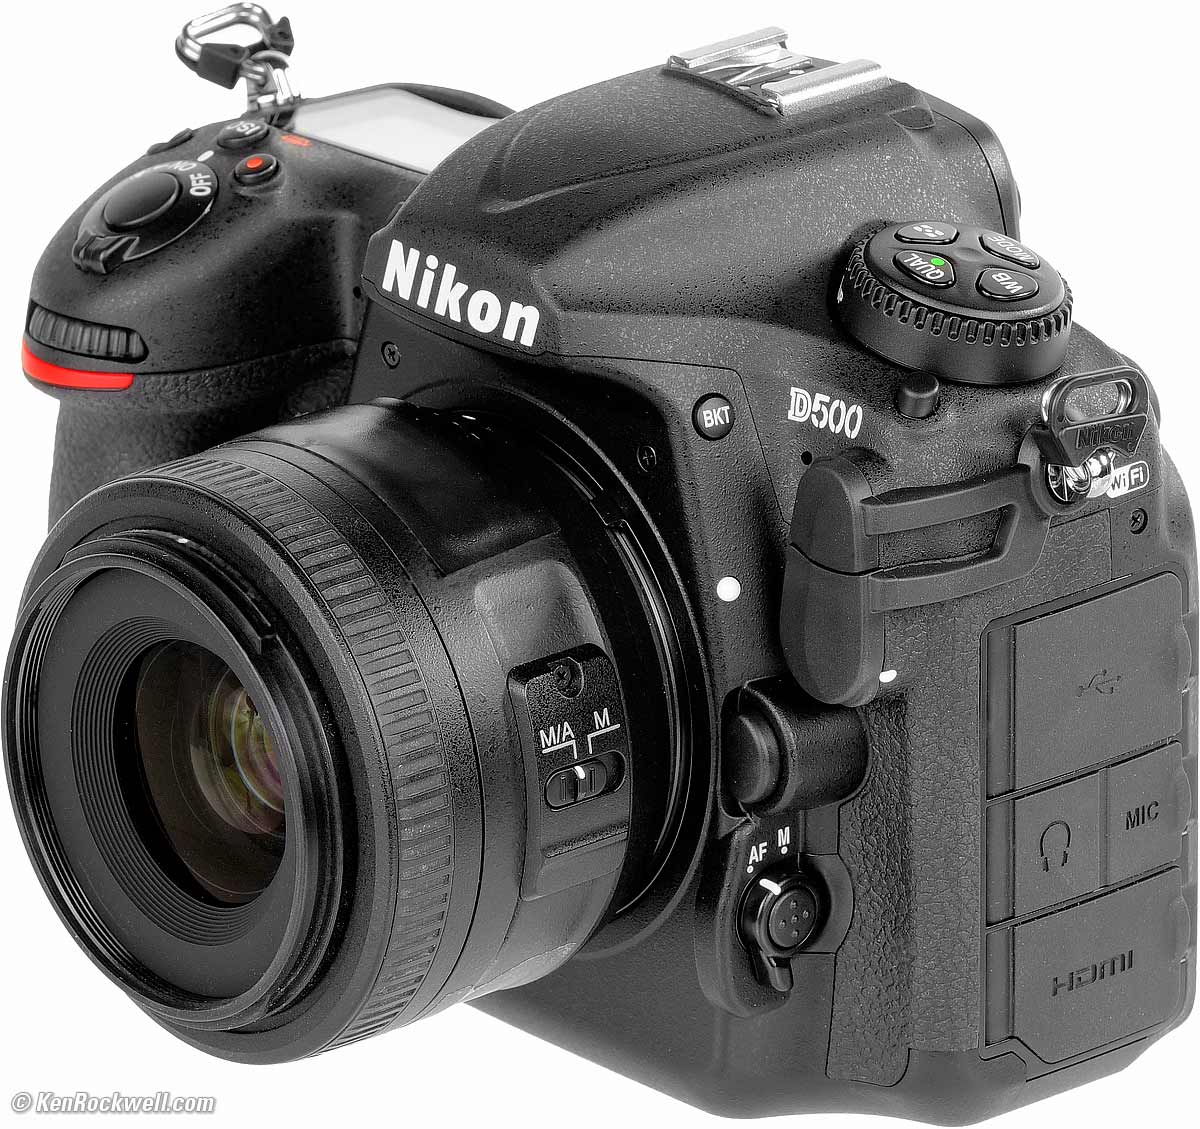 The Nikon D500 - 8 ideas to try with it